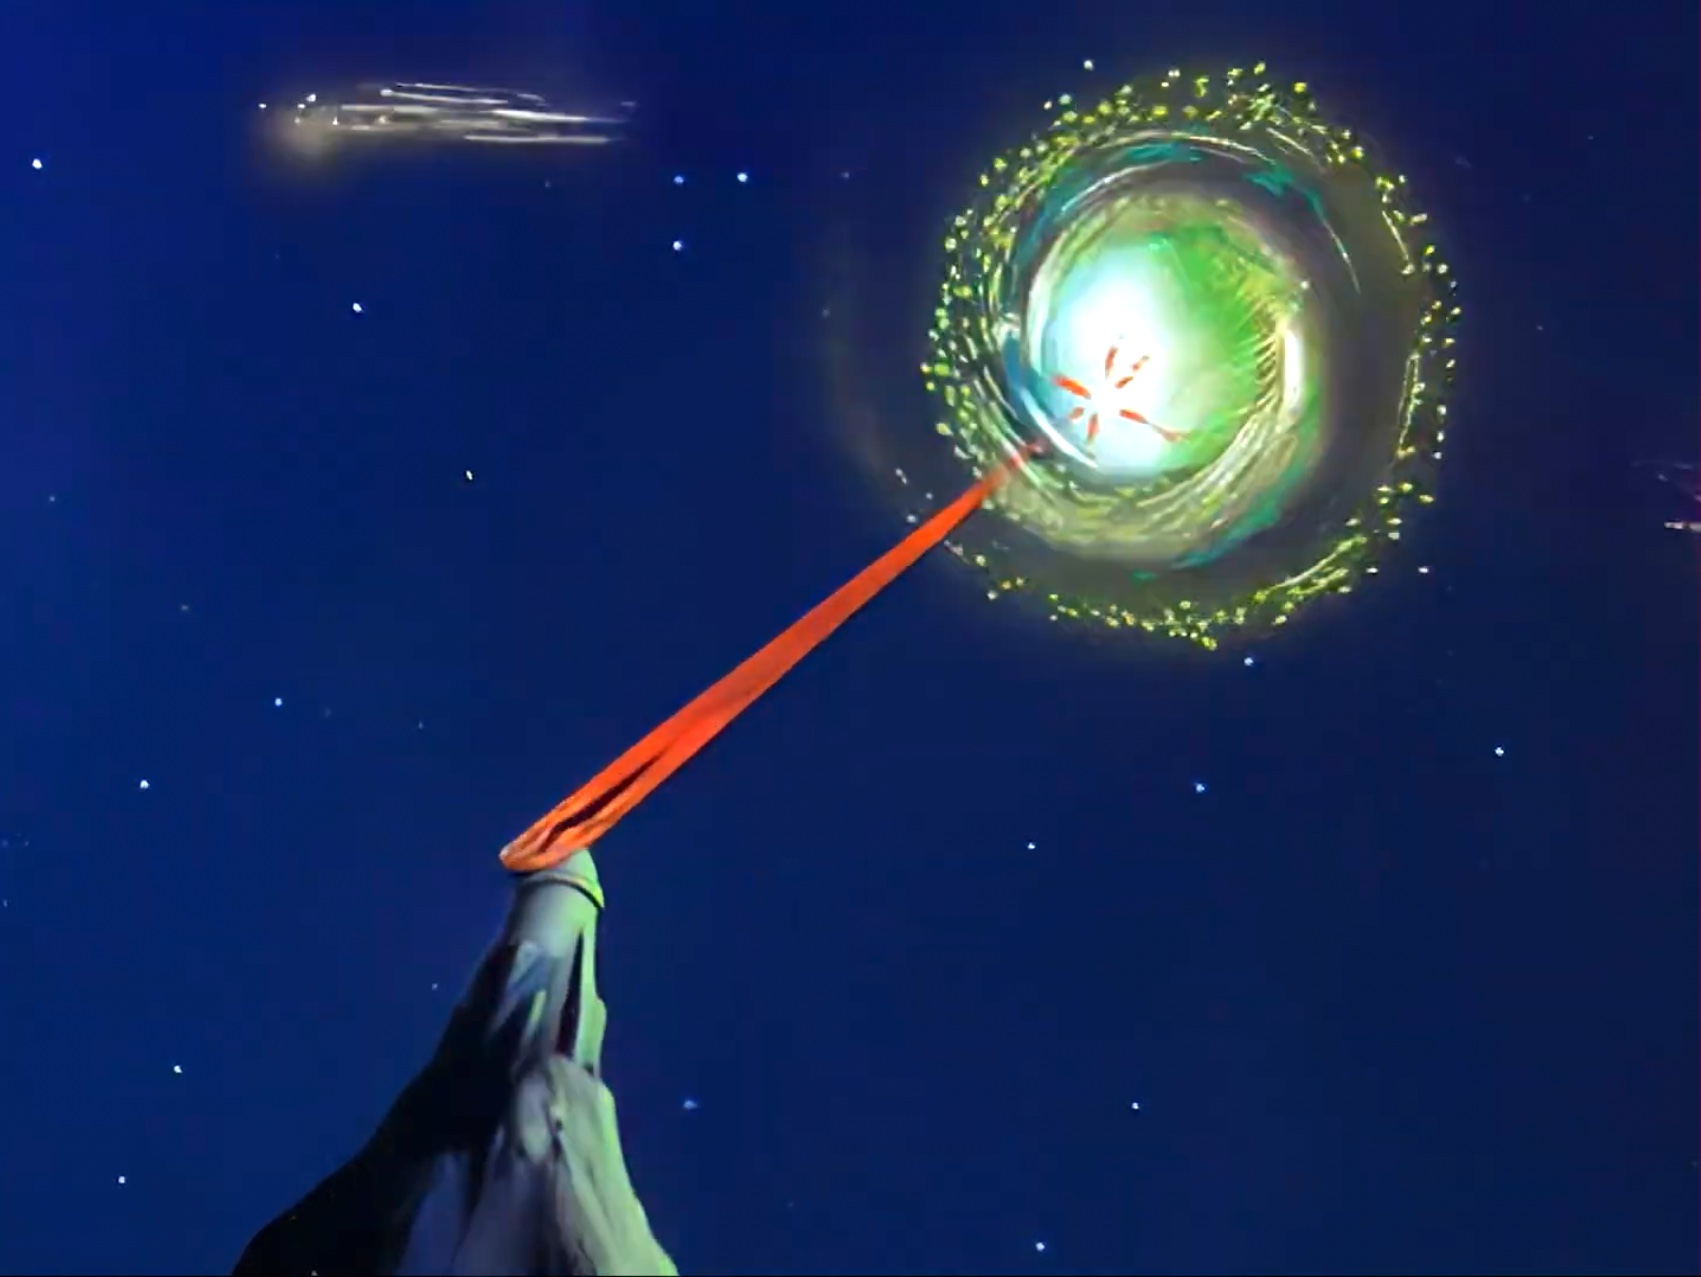 Repelling the comet in "The Magnetic Telescope"